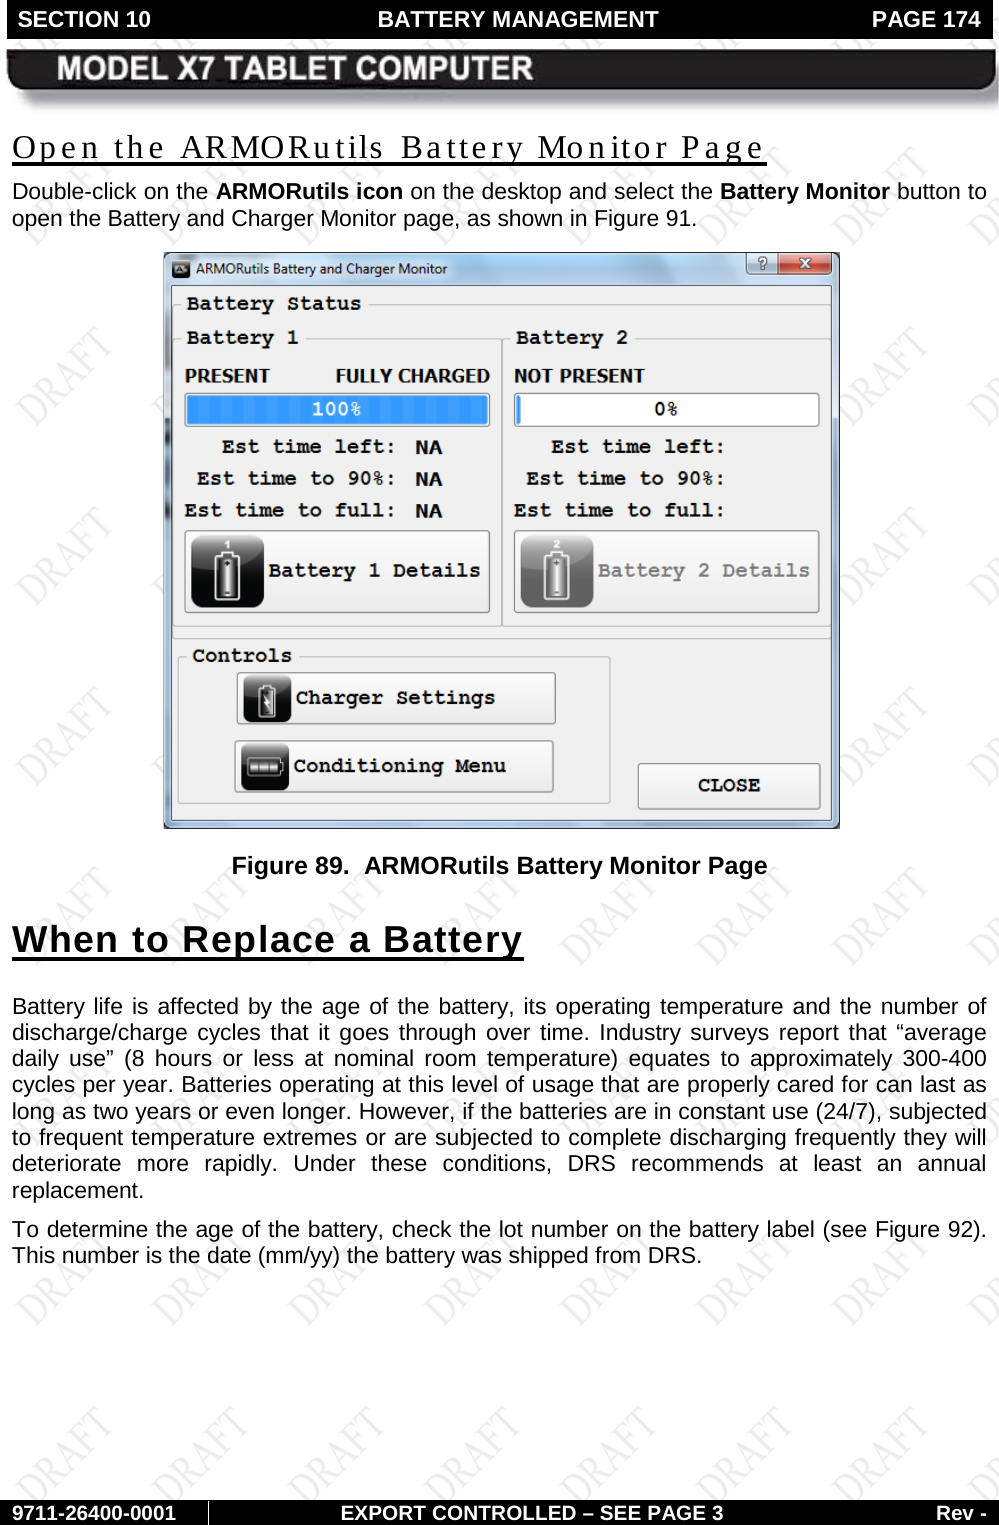 SECTION 10 BATTERY MANAGEMENT  PAGE 174        9711-26400-0001 EXPORT CONTROLLED – SEE PAGE 3 Rev - Open the ARMORutils  Battery Monitor Page Double-click on the ARMORutils icon on the desktop and select the Battery Monitor button to open the Battery and Charger Monitor page, as shown in Figure 91.  Figure 89.  ARMORutils Battery Monitor Page When to Replace a Battery Battery life is affected by the age of the battery, its operating temperature and the number of discharge/charge cycles that it goes through over time. Industry surveys report that “average daily use”  (8 hours or less at nominal room temperature) equates to approximately 300-400 cycles per year. Batteries operating at this level of usage that are properly cared for can last as long as two years or even longer. However, if the batteries are in constant use (24/7), subjected to frequent temperature extremes or are subjected to complete discharging frequently they will deteriorate more rapidly. Under these conditions, DRS recommends at least an annual replacement. To determine the age of the battery, check the lot number on the battery label (see Figure 92). This number is the date (mm/yy) the battery was shipped from DRS.   